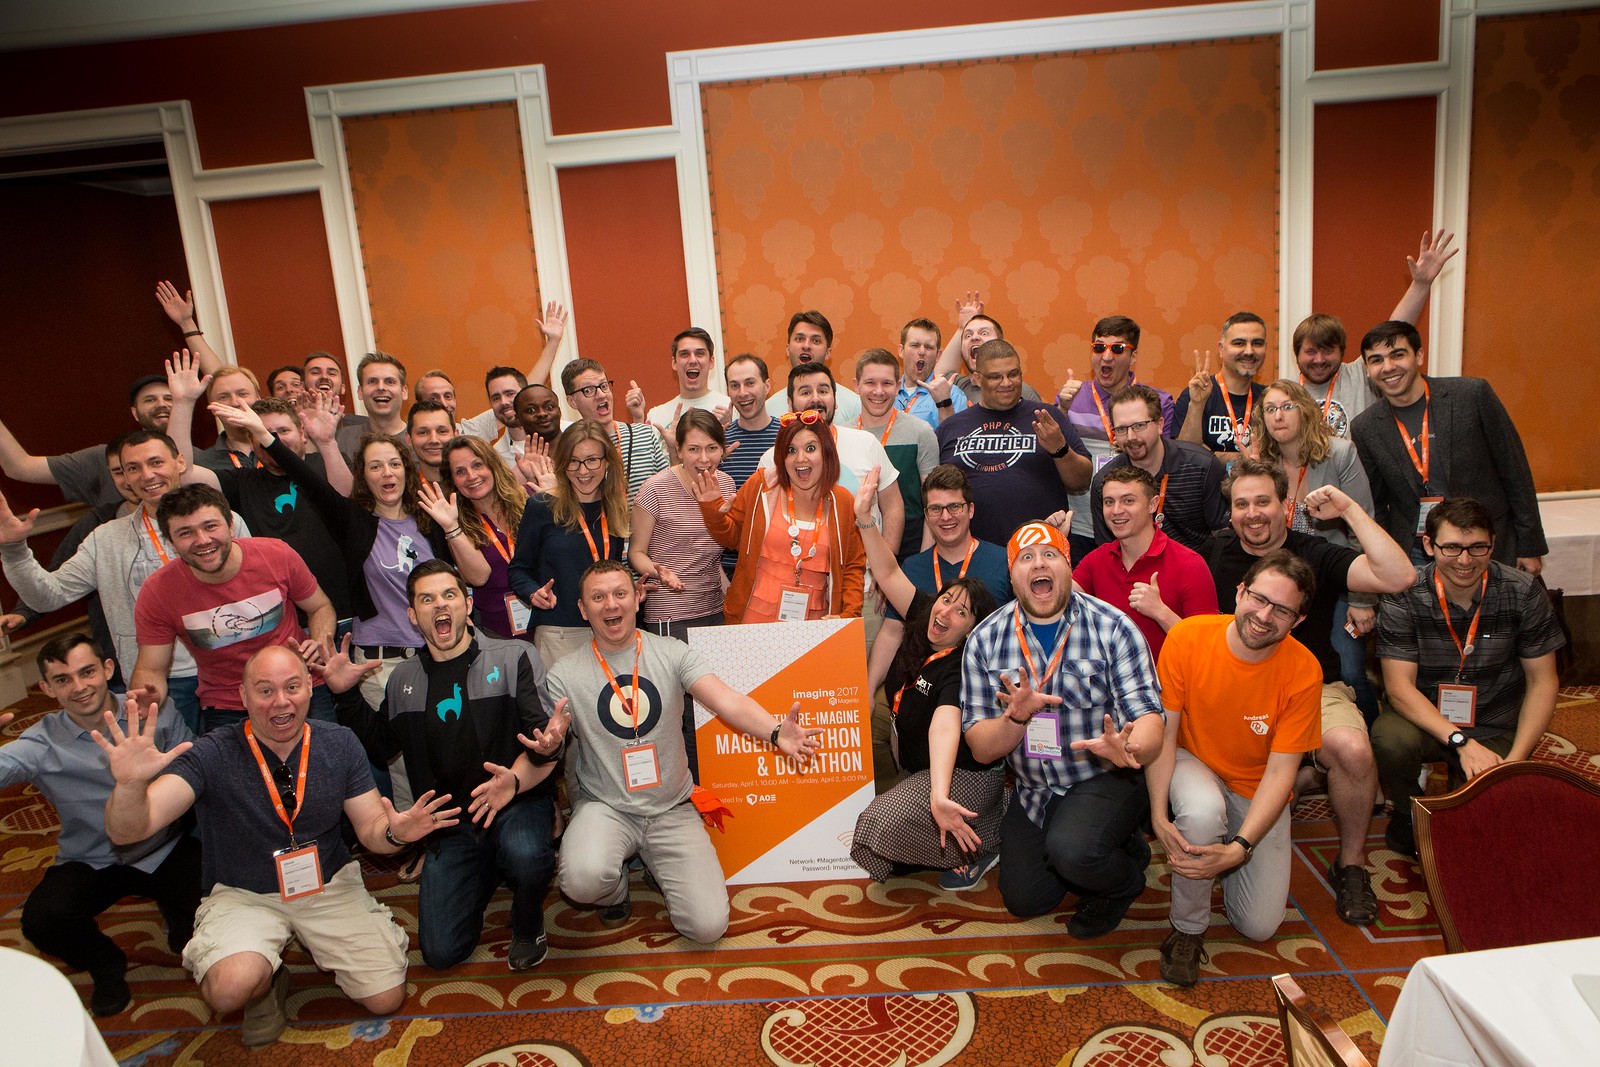 magento: Our wonderful community manager @Sherrierohde recapped #MagentoImagine in this week's #MagentoMonday blog: https://t.co/UqI4d2Fwo7